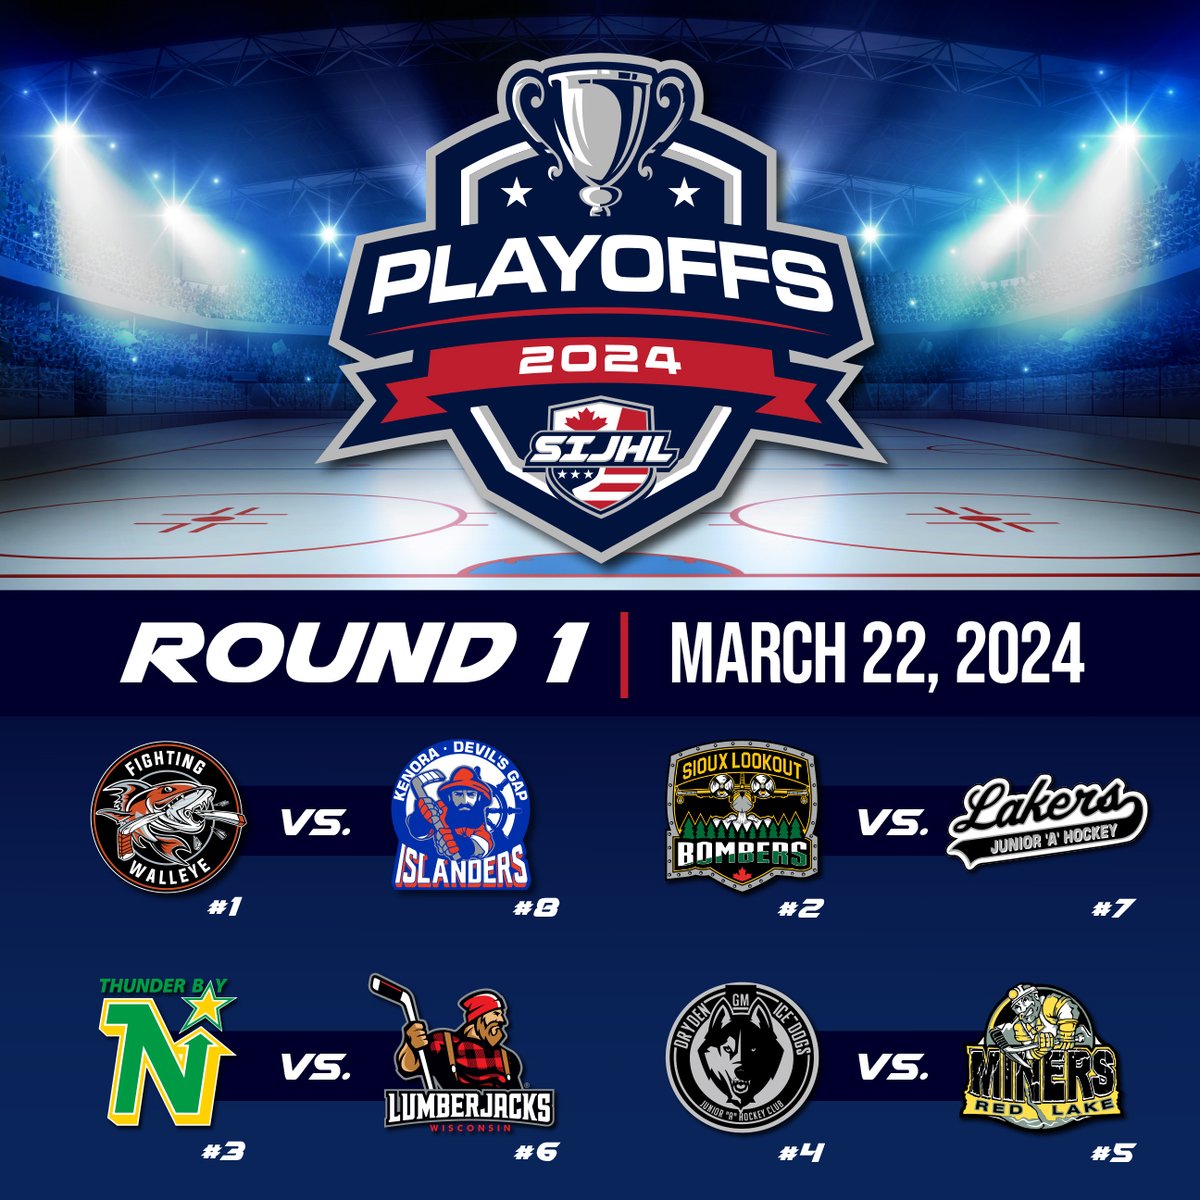 Playoff action resumes tonight! 3 Games: 🏠 @RedLakeMiners (2) 🚌 @DrydenGMIceDogs (0) 🏟️ Cochenour Arena ⏰ 7:30pm 🏠 @WILumberjacks (0) 🚌 @TBNorthStars (2) 🏟️ Rice Lake Arena ⏰ 7:05pm 🏠 @FF_Lakers (0) 🚌 @SLBombers (2) 🏟️ Ice For Kids Arena ⏰ 7:15pm